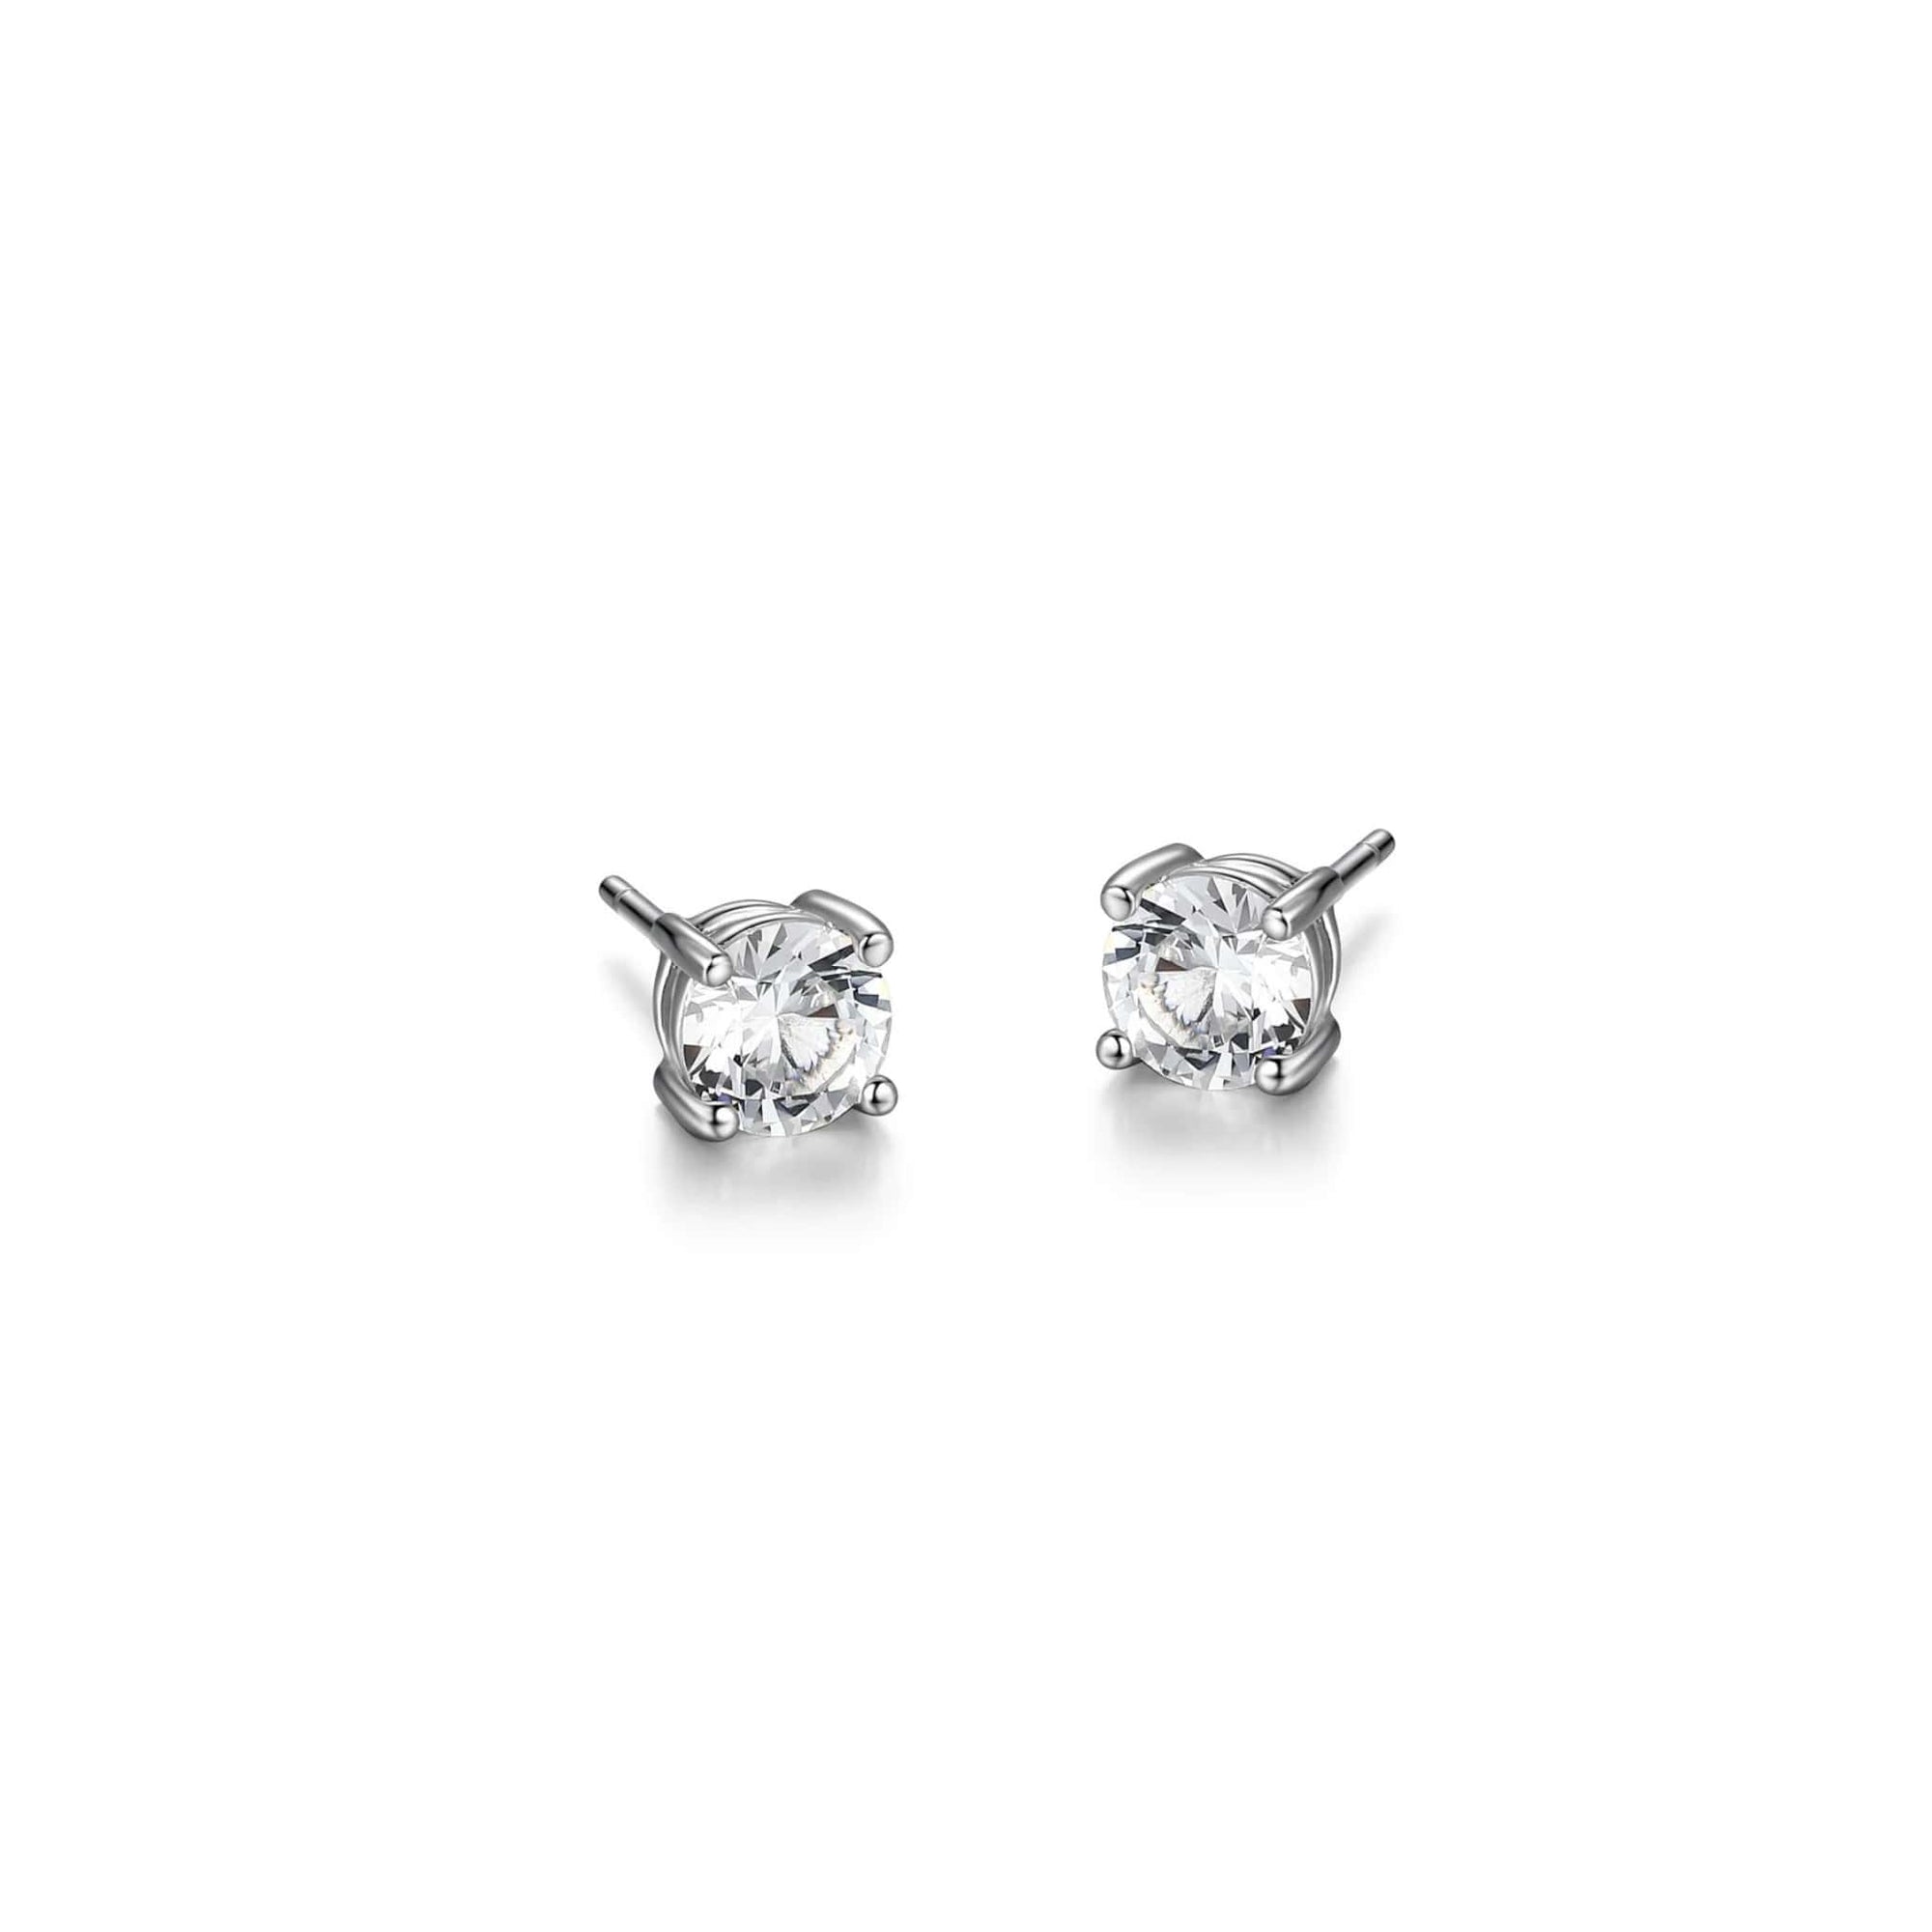 ETHOS "Basic" White Sapphire Silver Stud Earrings at Arman's Jewellers Kitchener